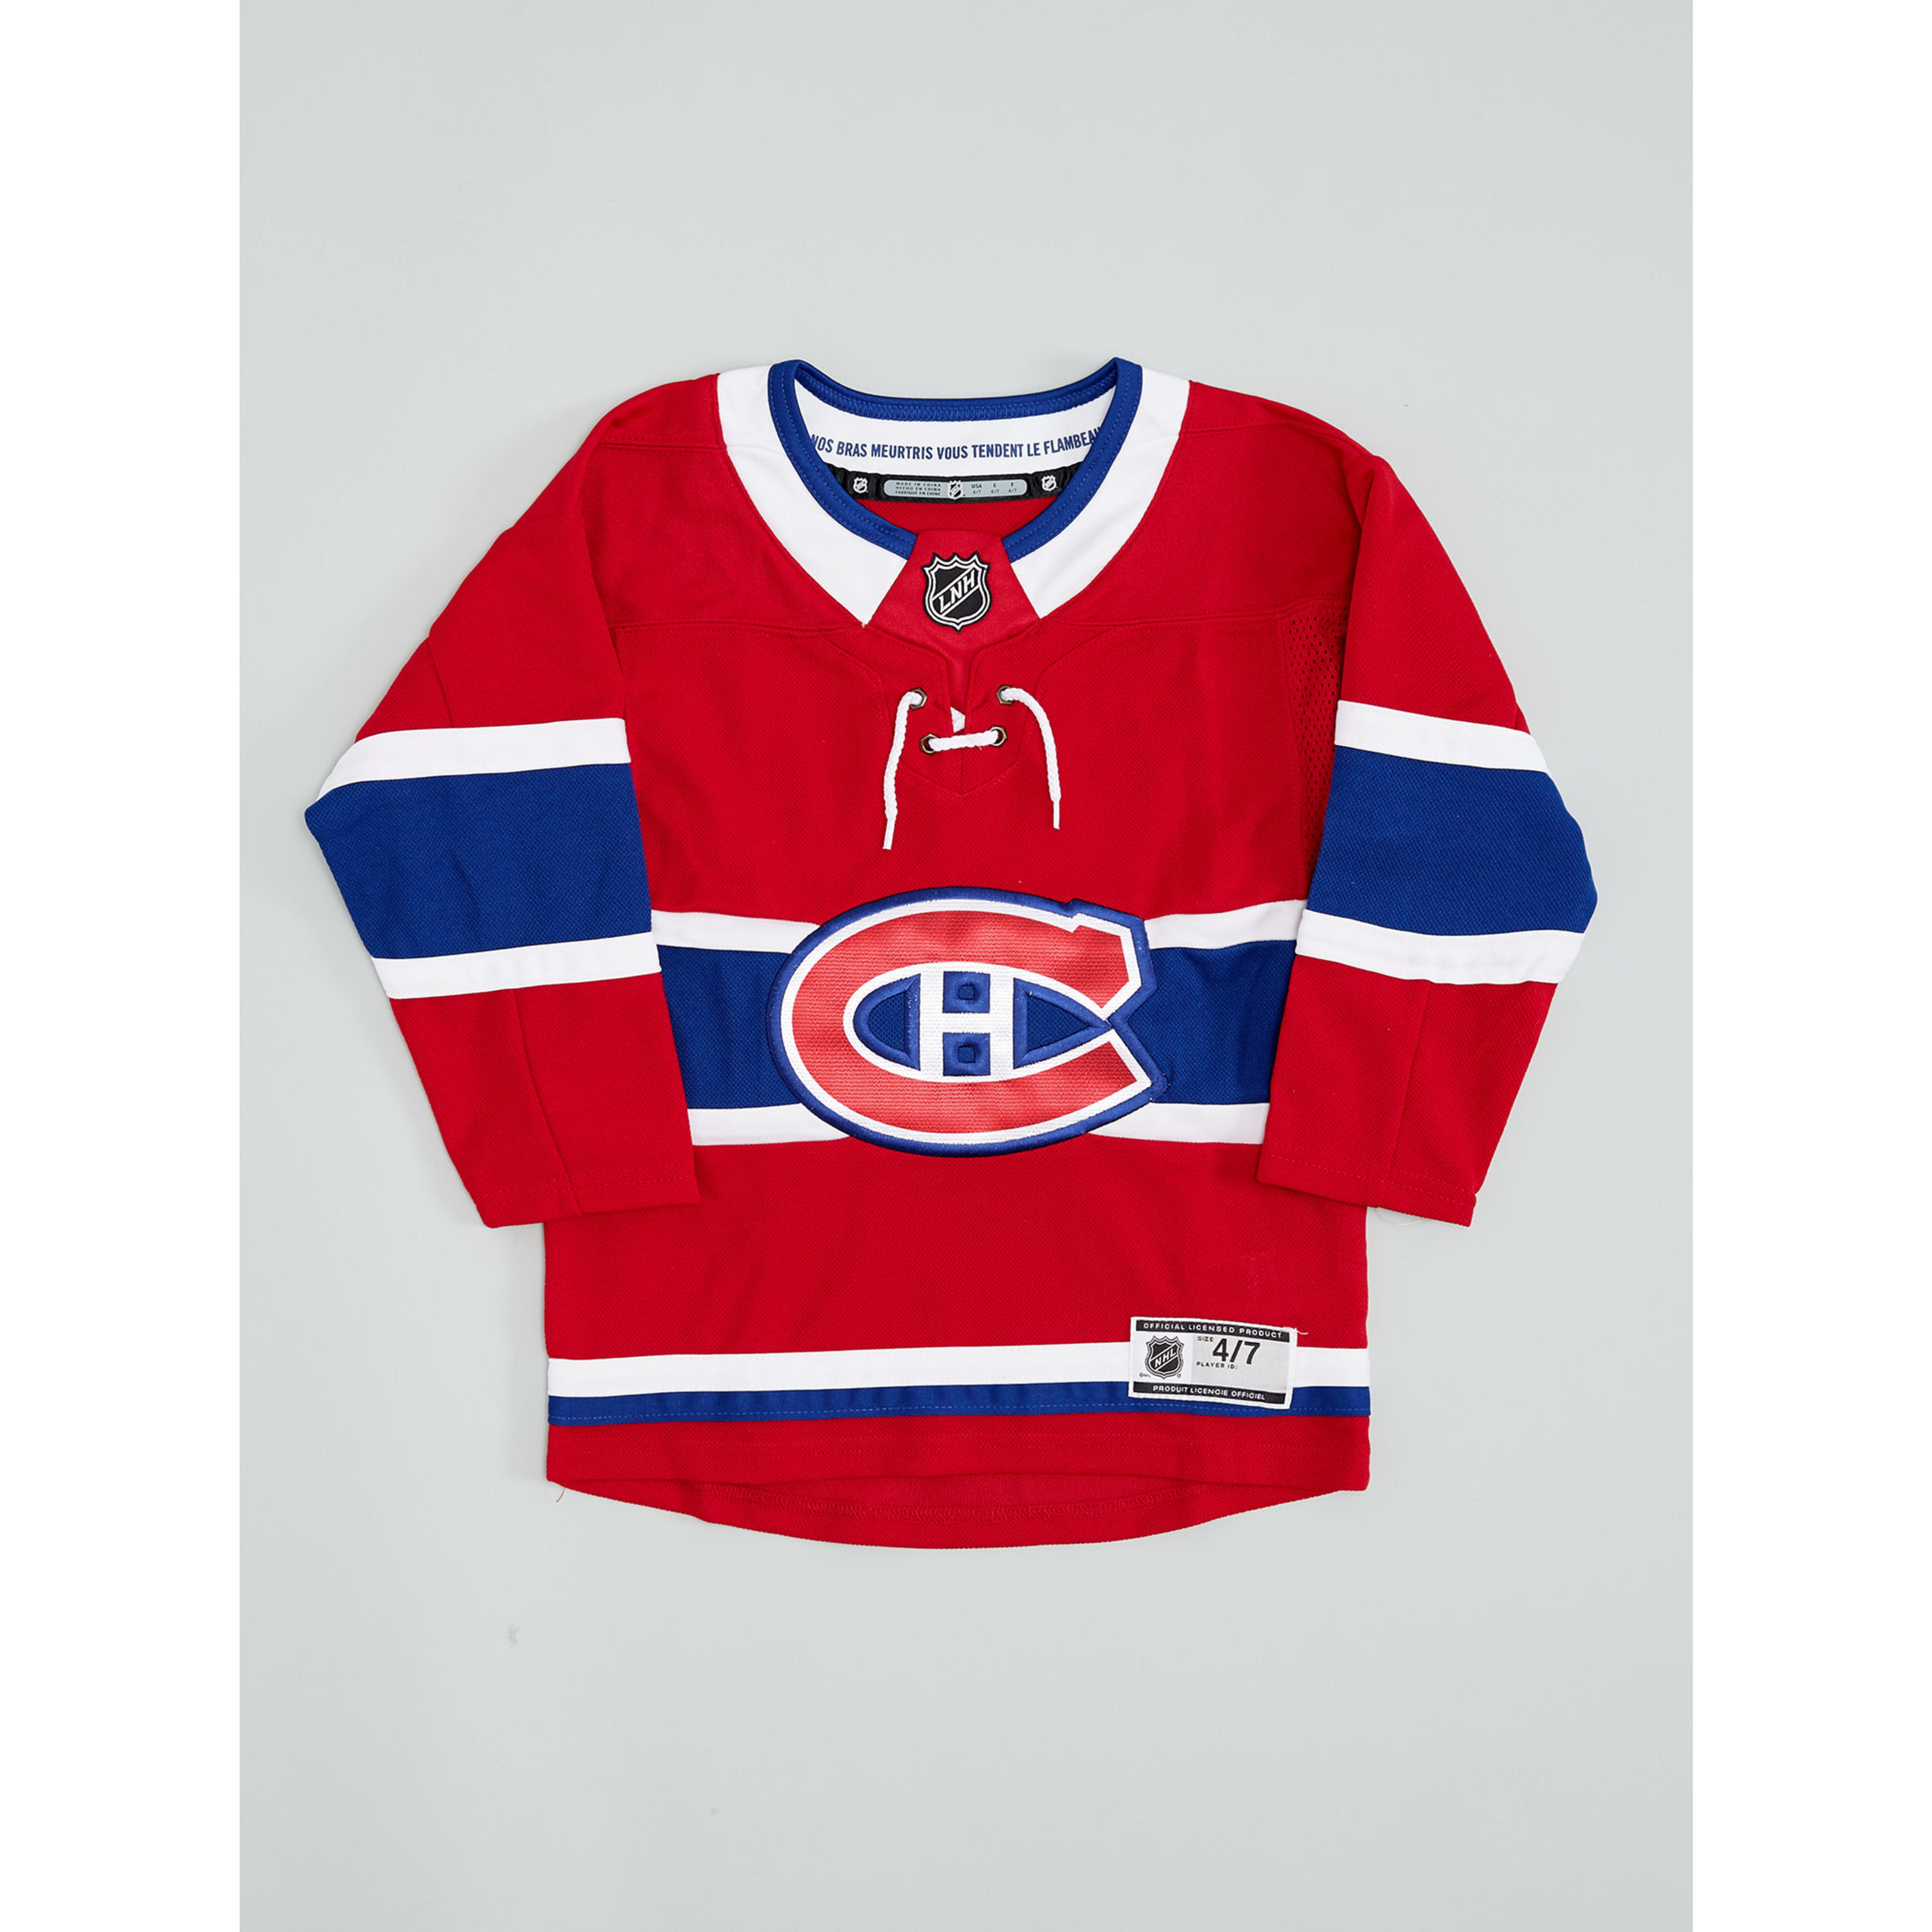 Outerstuff Montreal Canadiens NHL Premier Youth Replica NHL Hockey Jersey - Away / L/XL